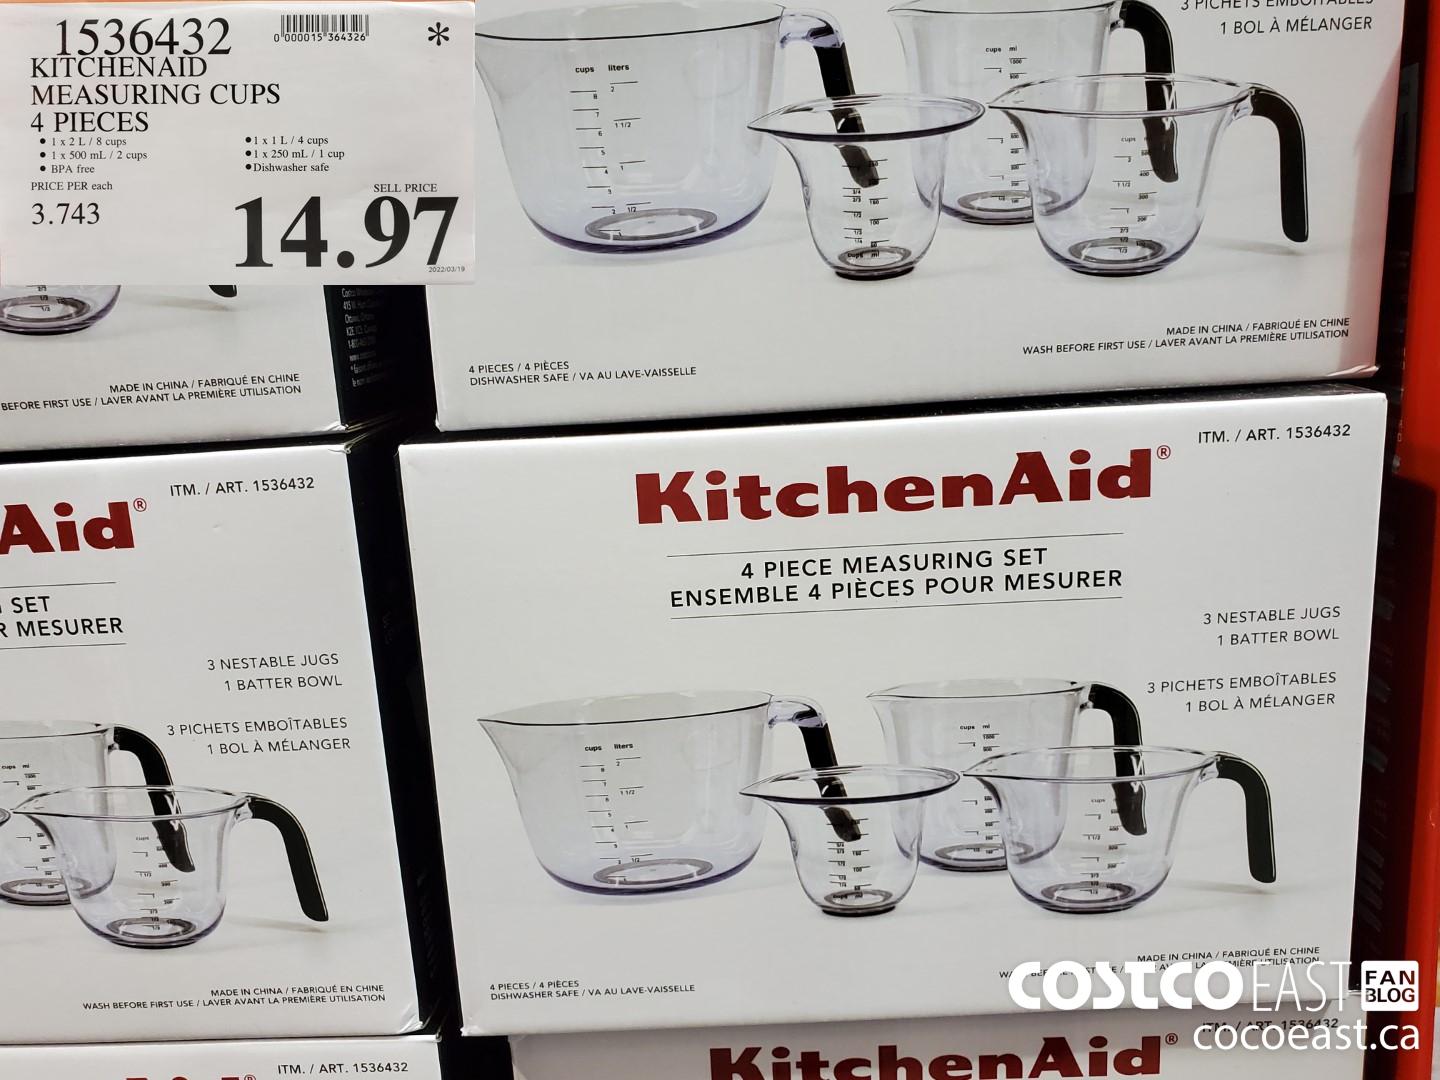 https://east.cocowest1.ca/uploads/2022/03/KITCHENAID_MEASURING_CUPS_4_PIECES_20220321_51498.jpg